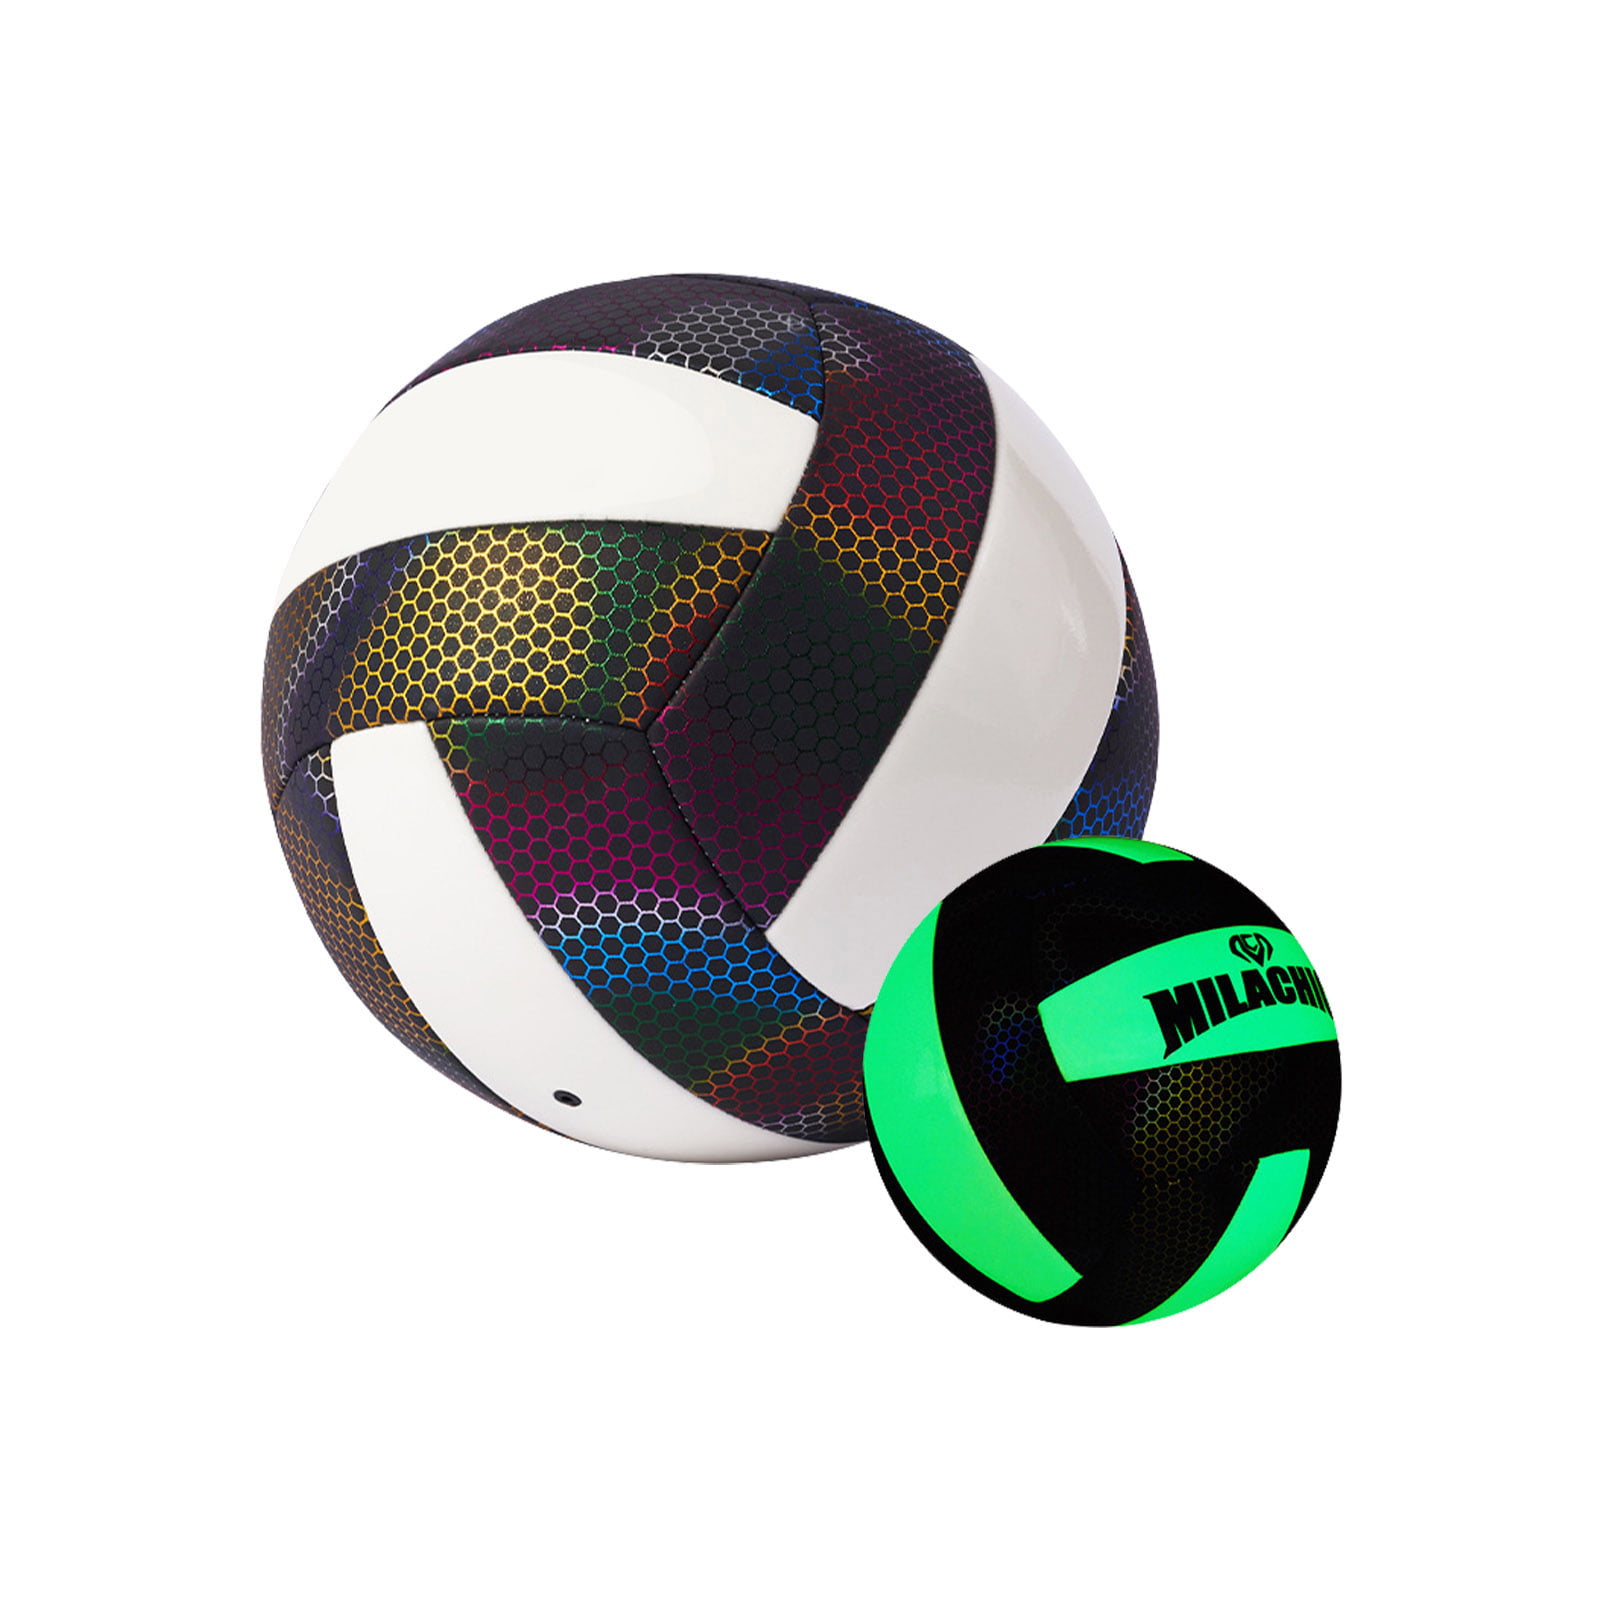 Holographic Glowing Reflective Volleyball Glow in The Dark Volleyball Light Up Outdoor Volleyball Glow Volleyball Perfect Toy for Night Game 